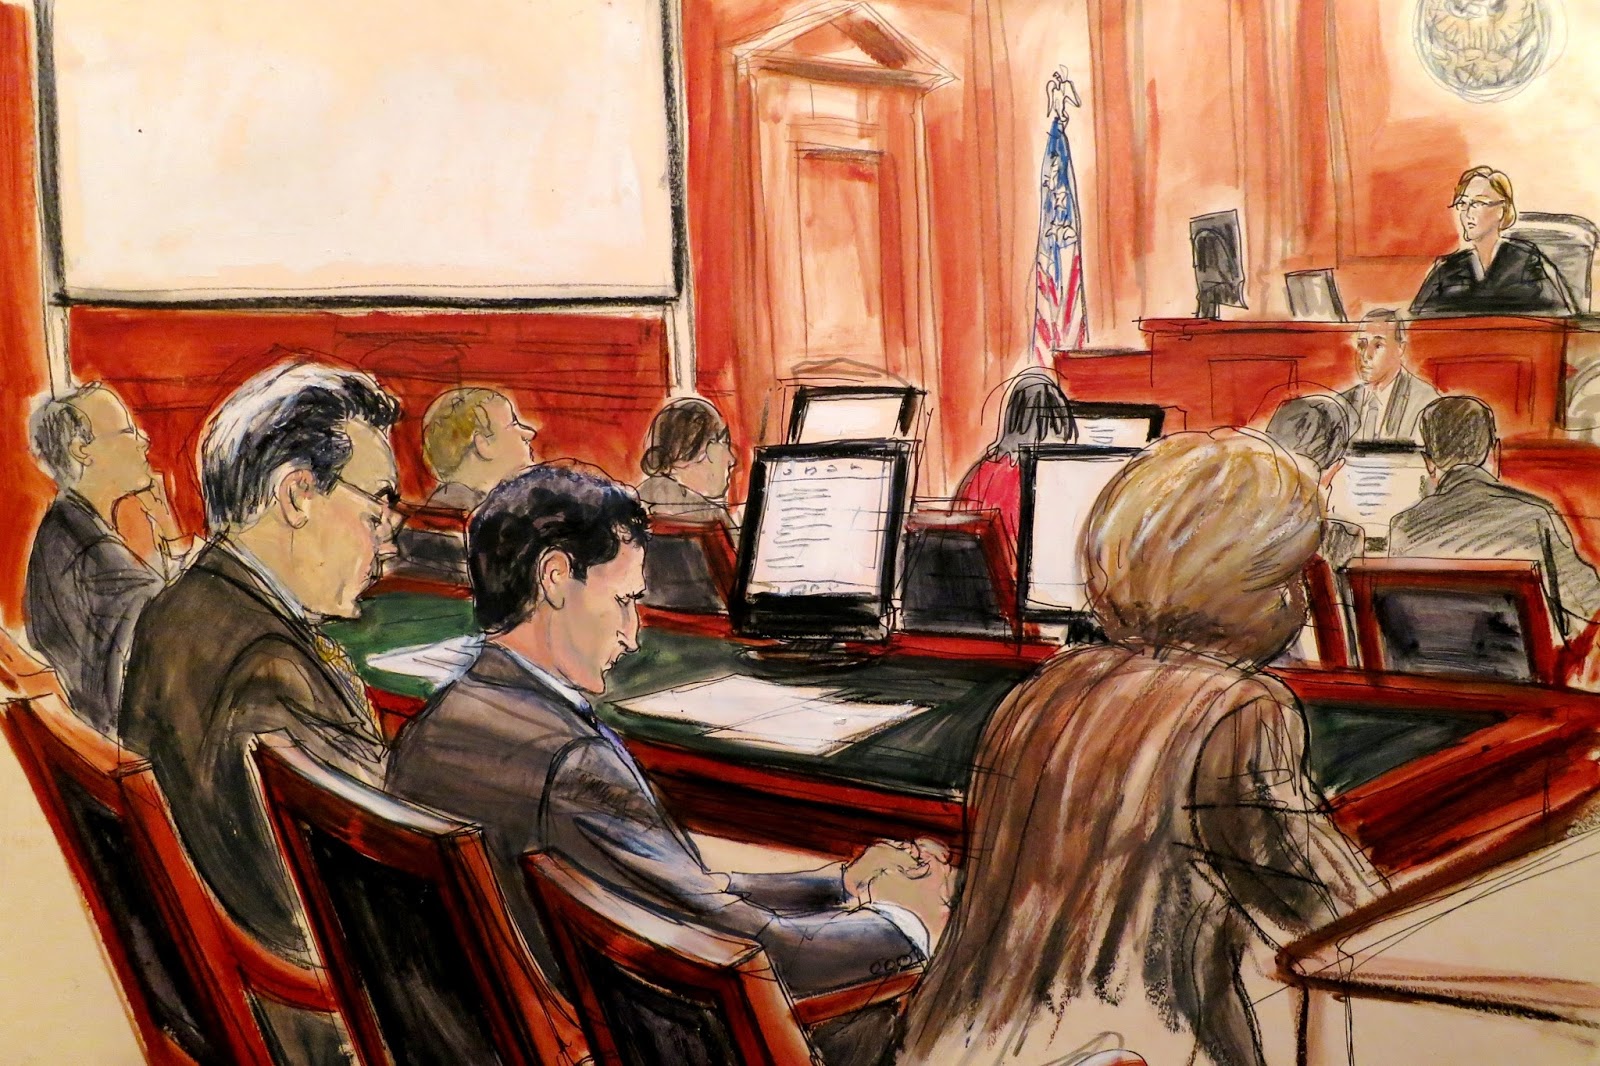 ILLUSTRATED COURTROOM: August 2013